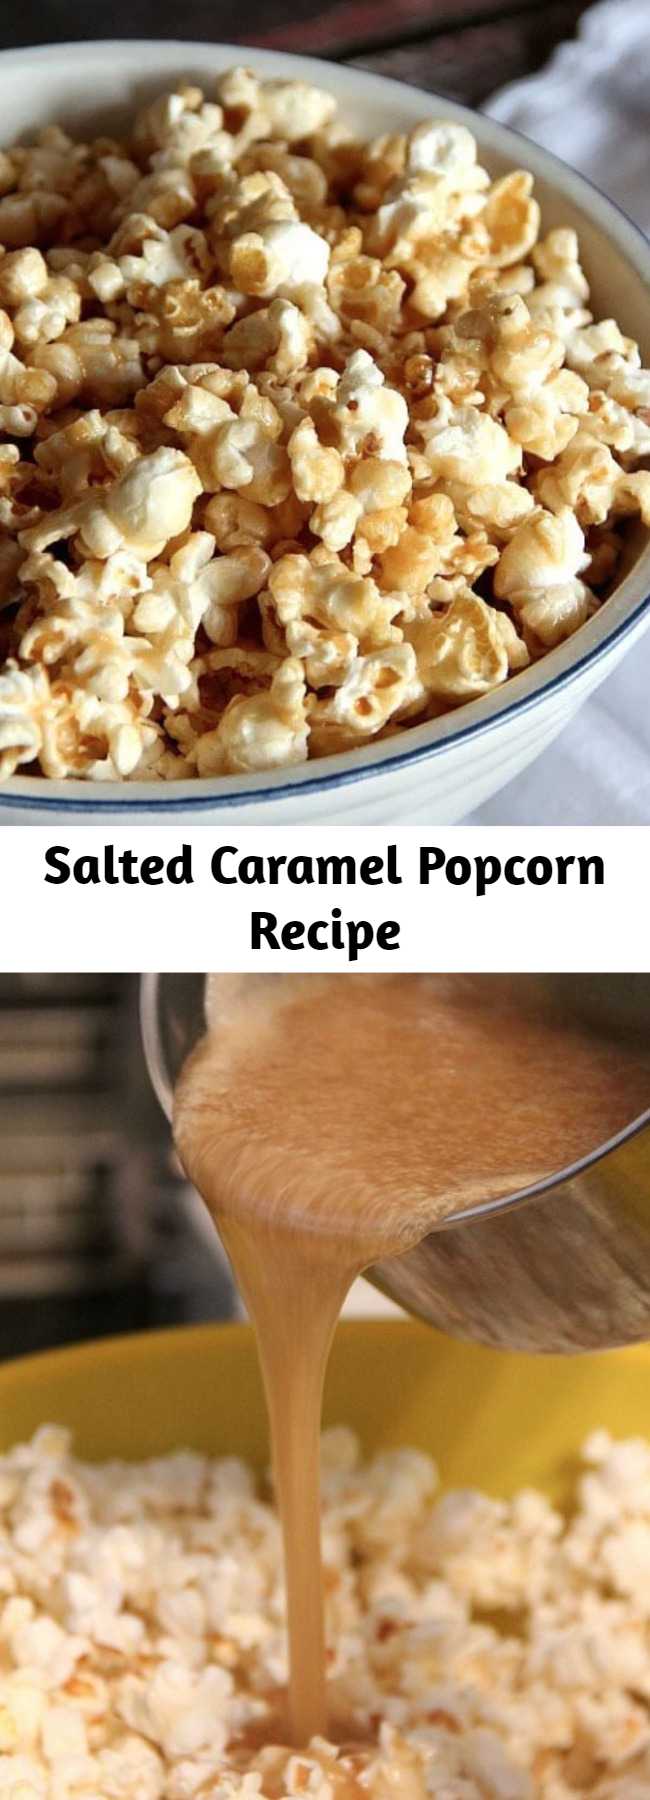 Salted Caramel Popcorn Recipe - This Easy Salted Caramel Popcorn Recipe is my favorite Caramel Corn Recipe! It’s so easy and adding that extra salt gives it the perfect salty/sweet combo!